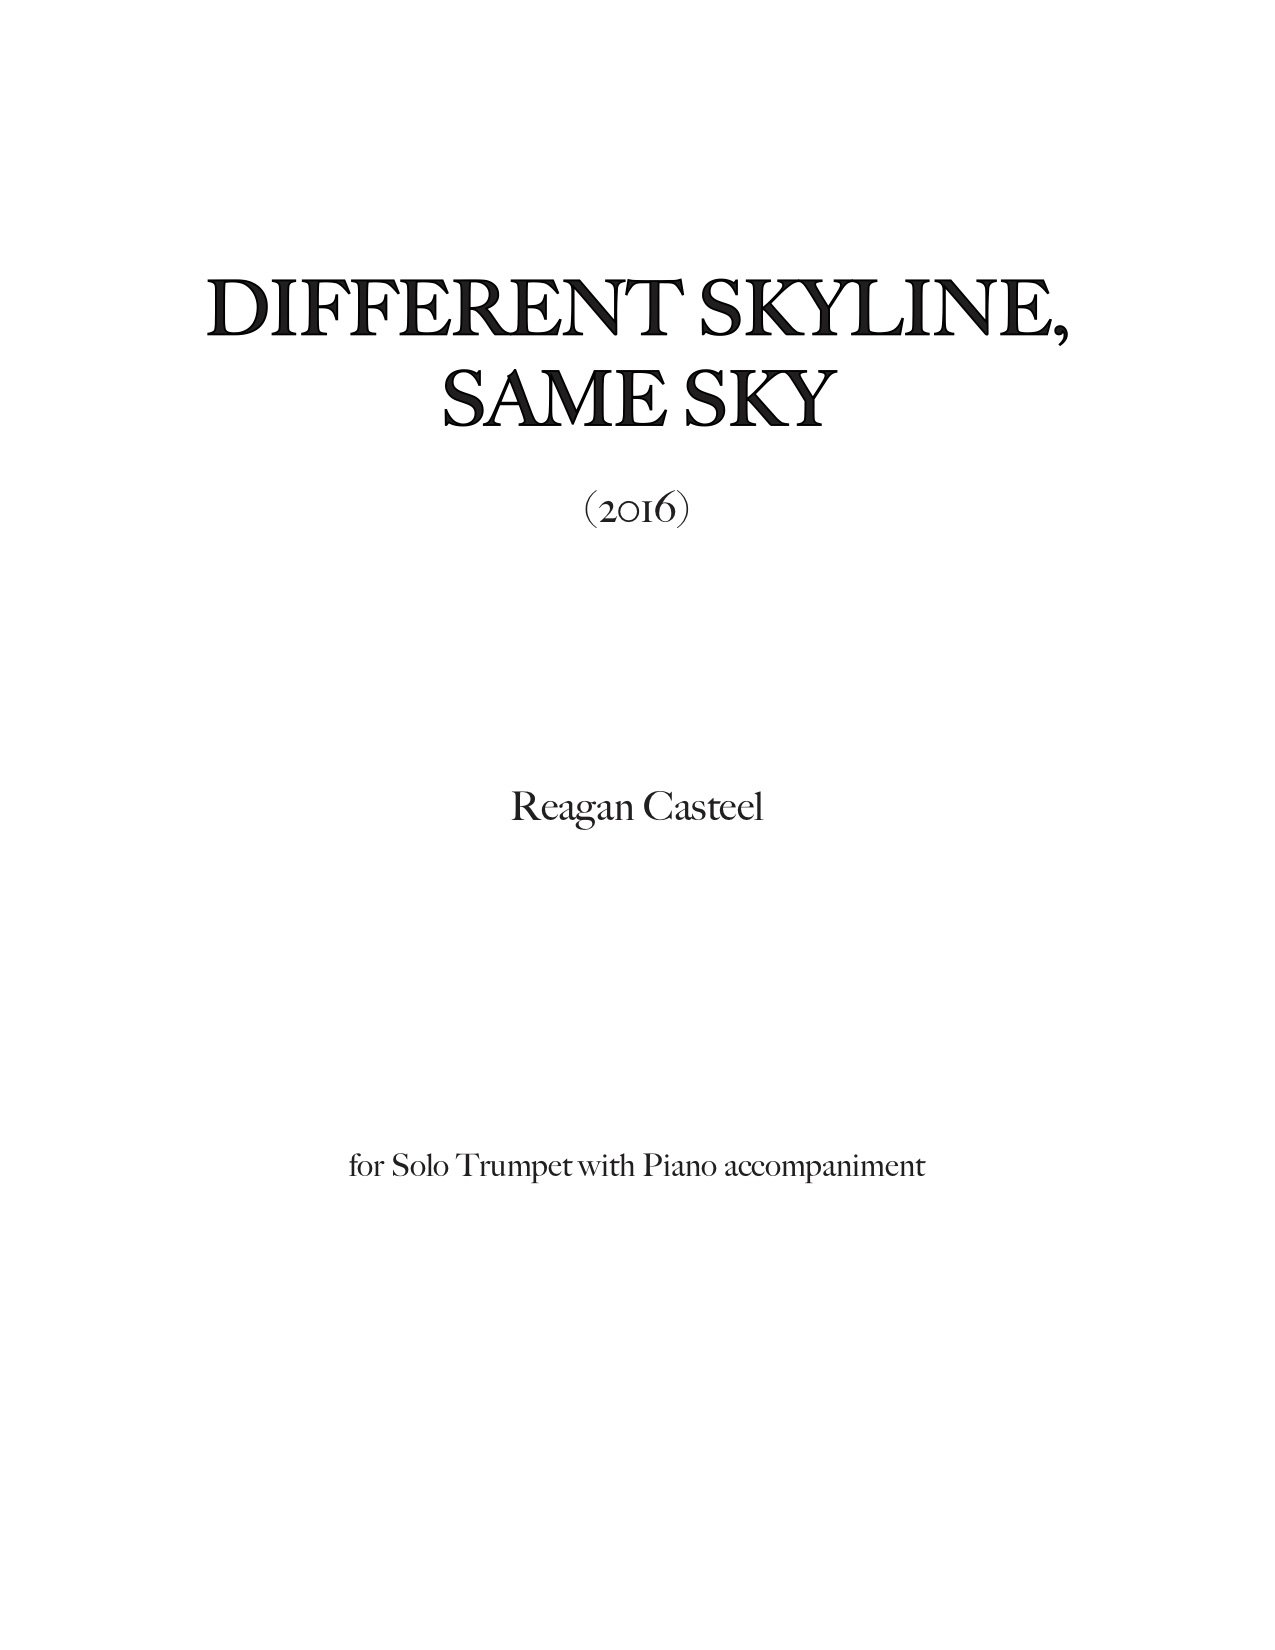 Different Skyline, Same Sky Full Score and Parts (dragged).jpg